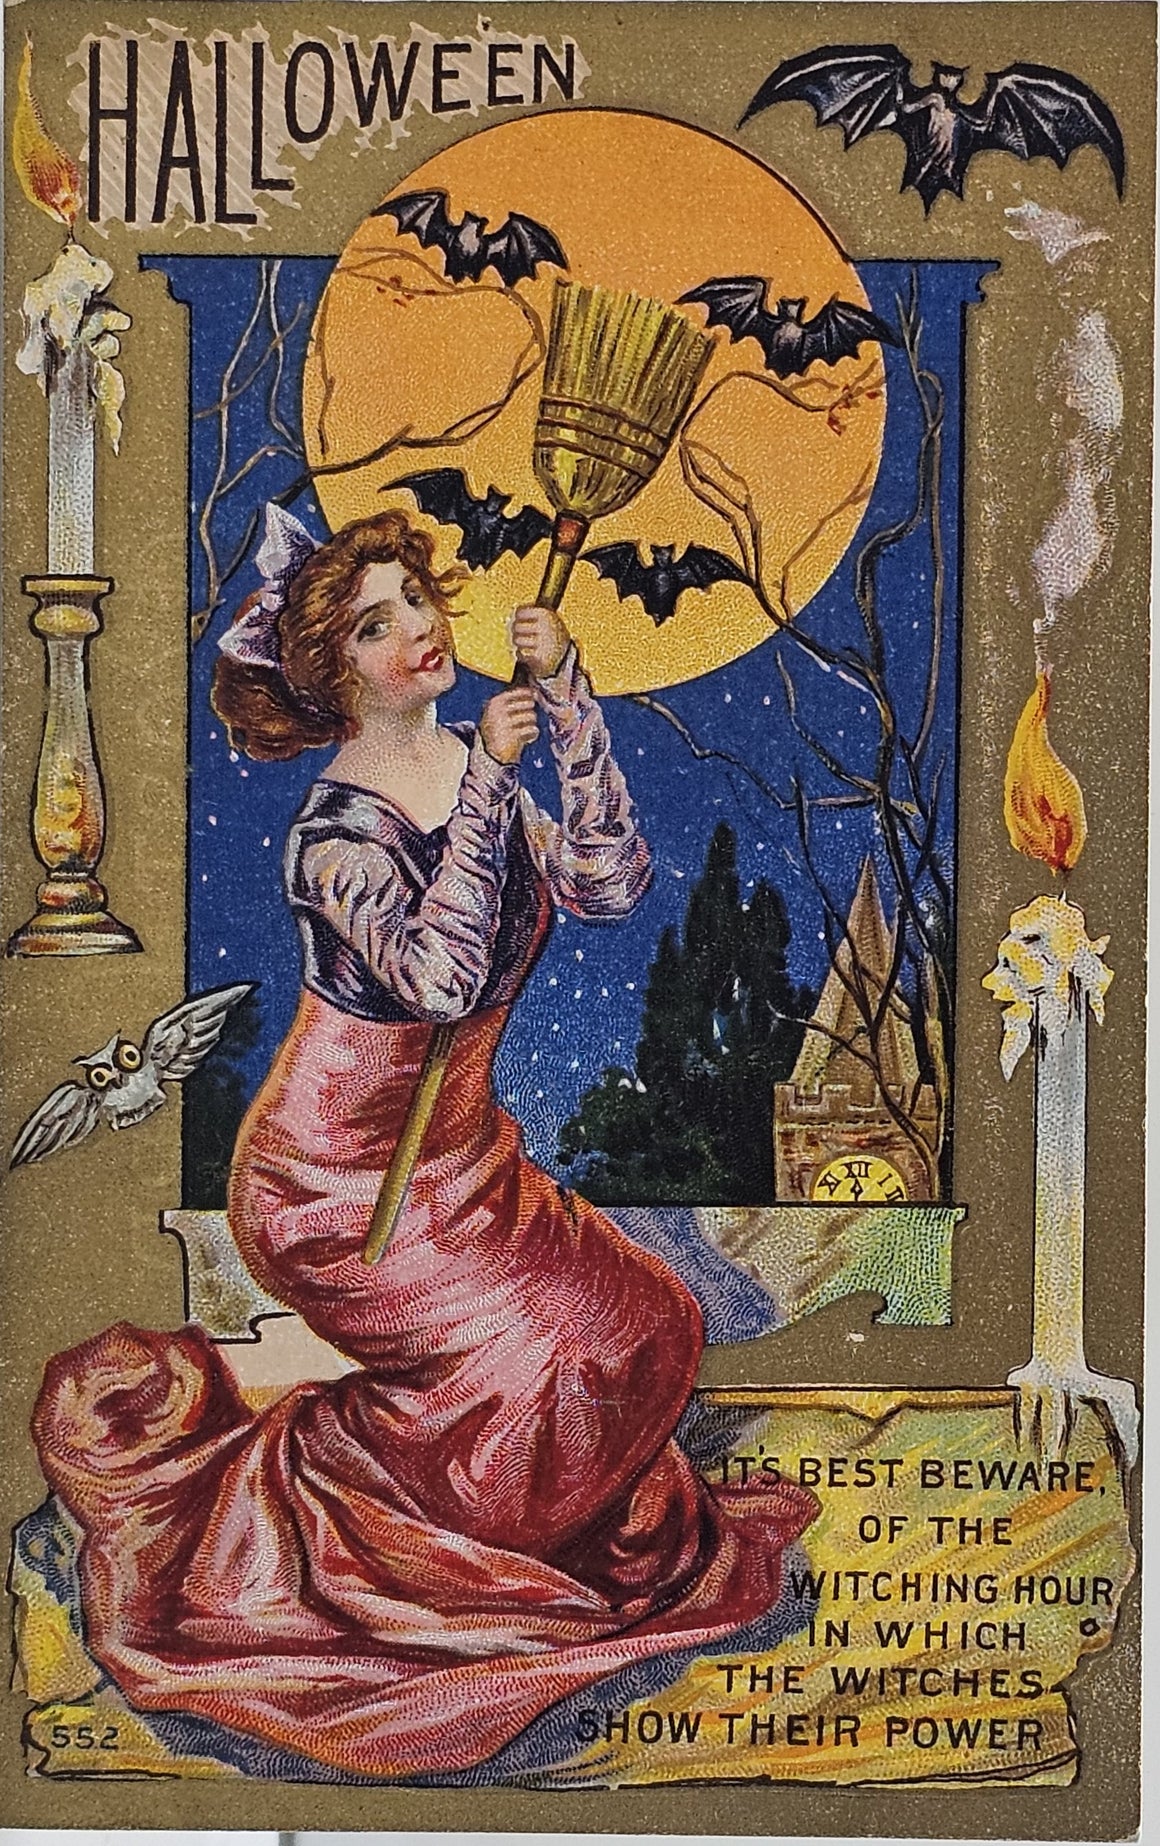 Halloween Postcard Glamorous Witch Holding Broomstick with Flying Bats in Front of Full Moon Series 552 Suffrage Women Movement